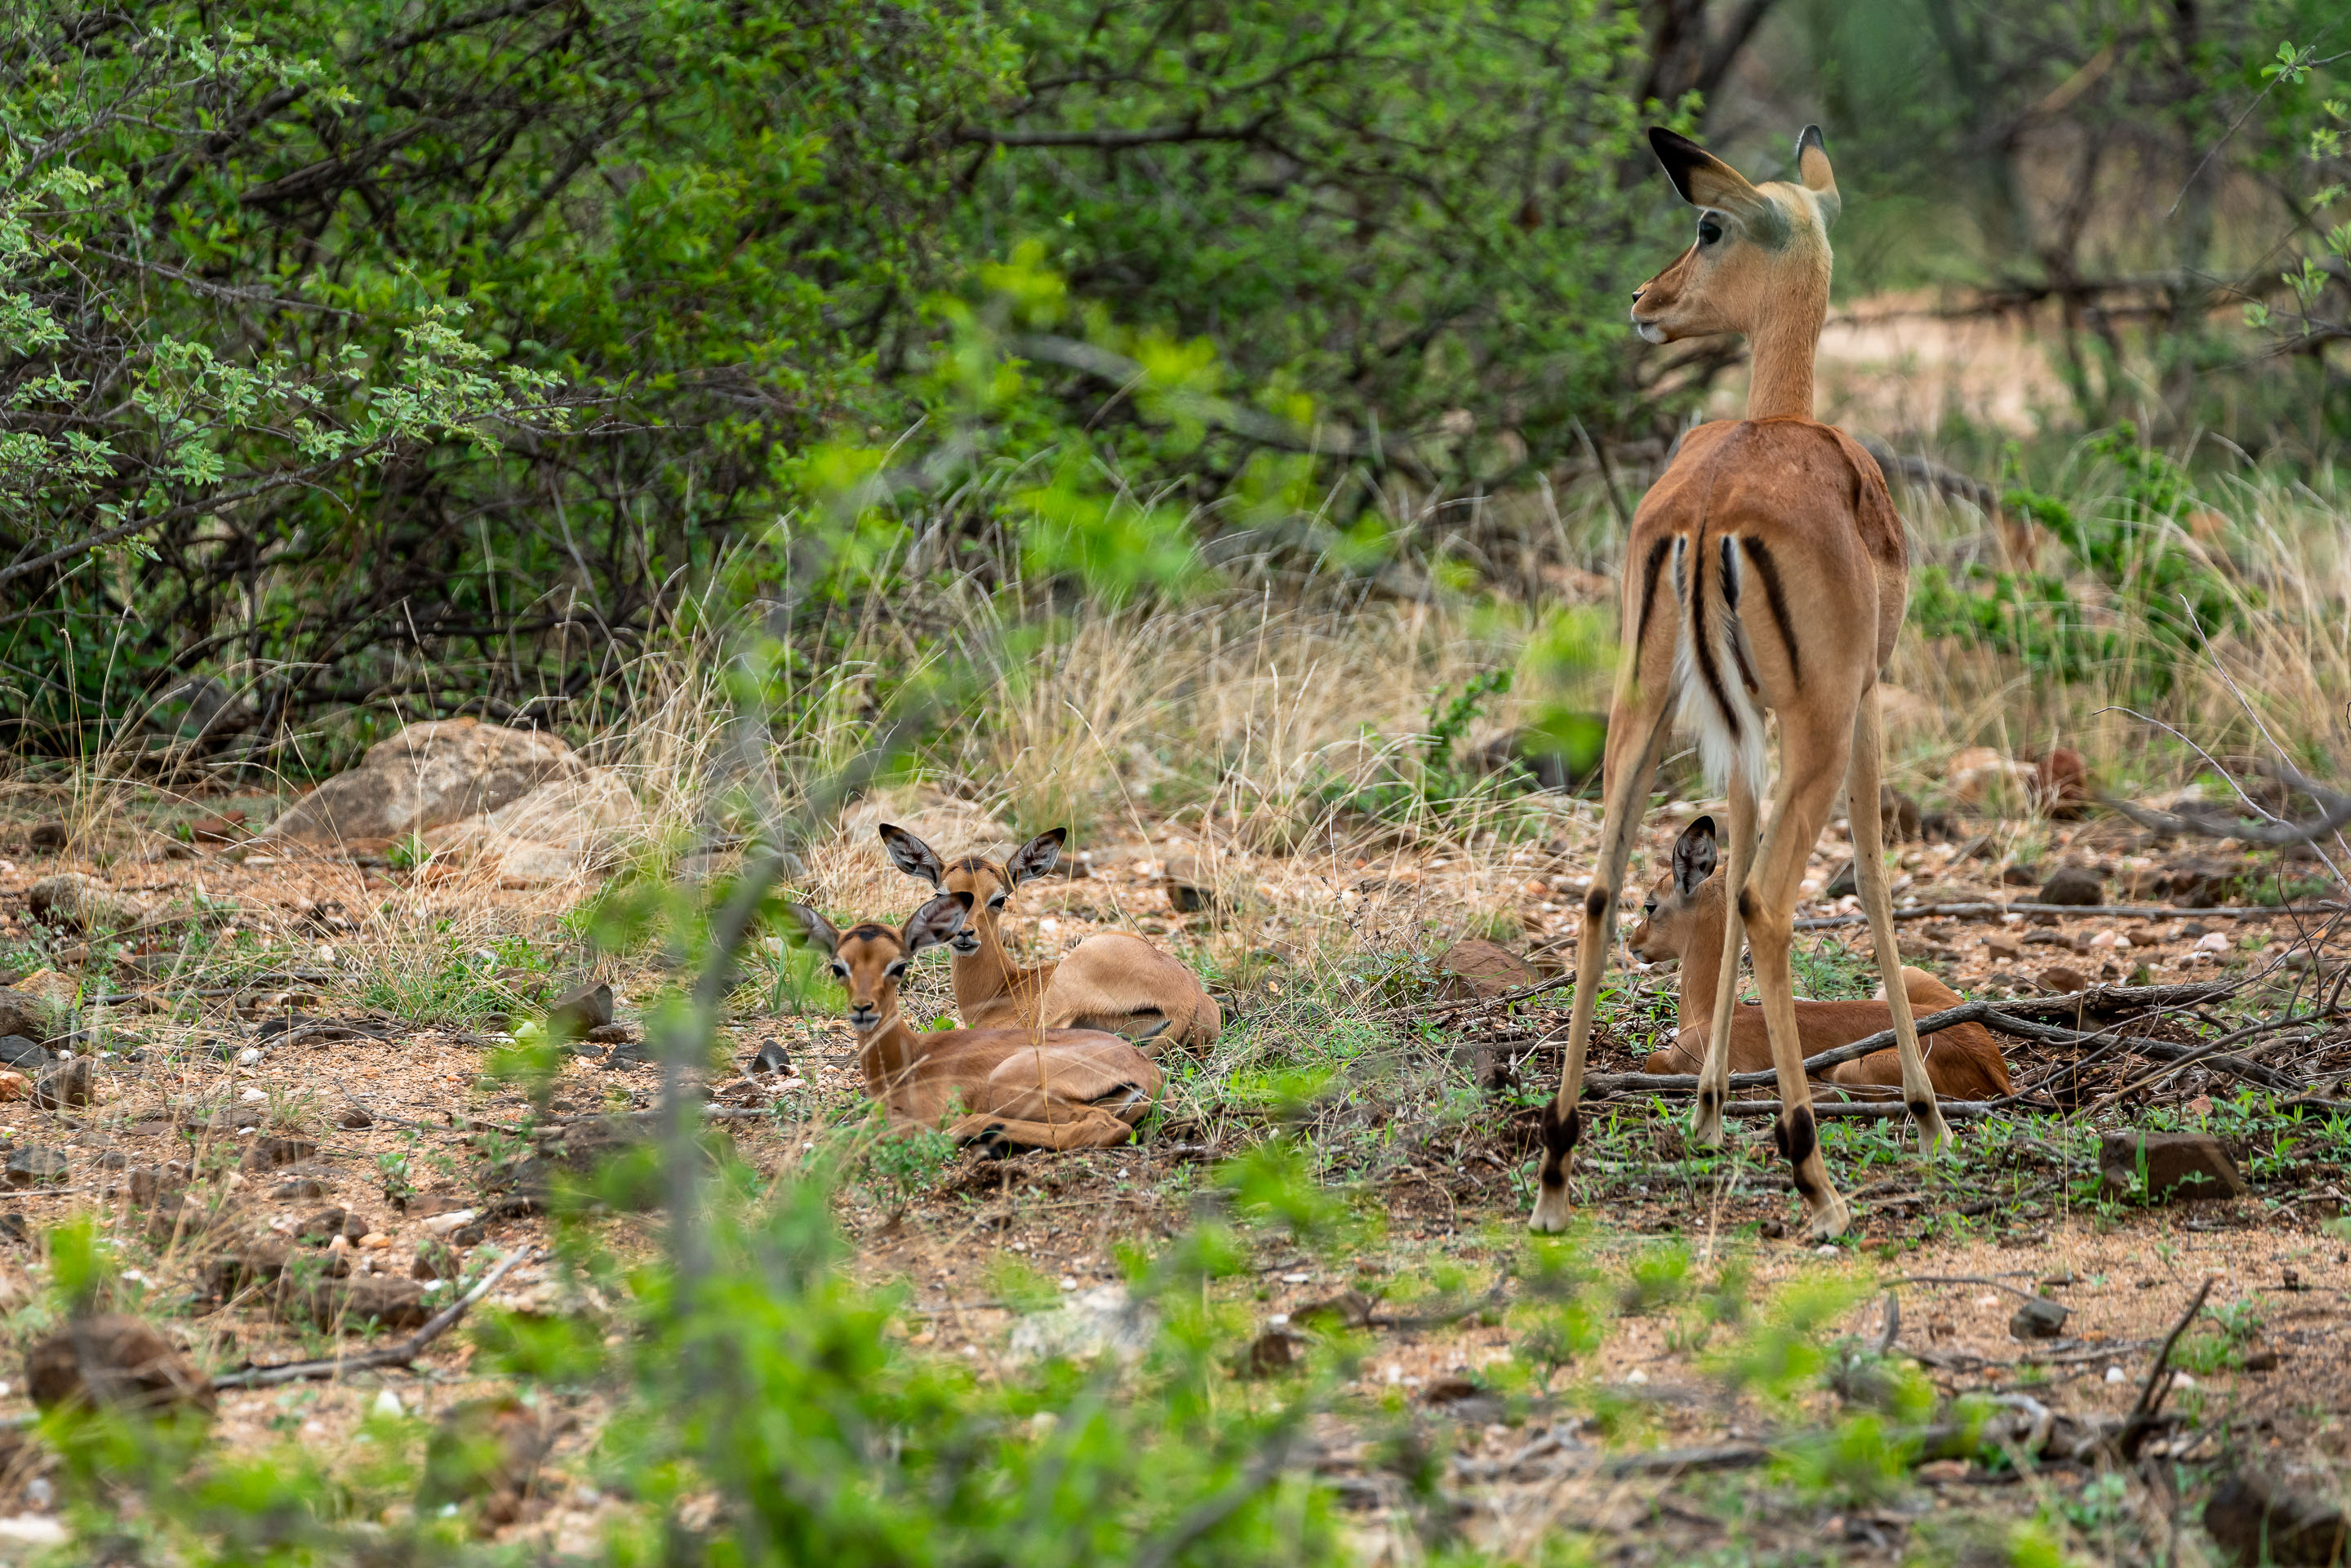 Impala babies in Balule Nature Reserve, South Africa